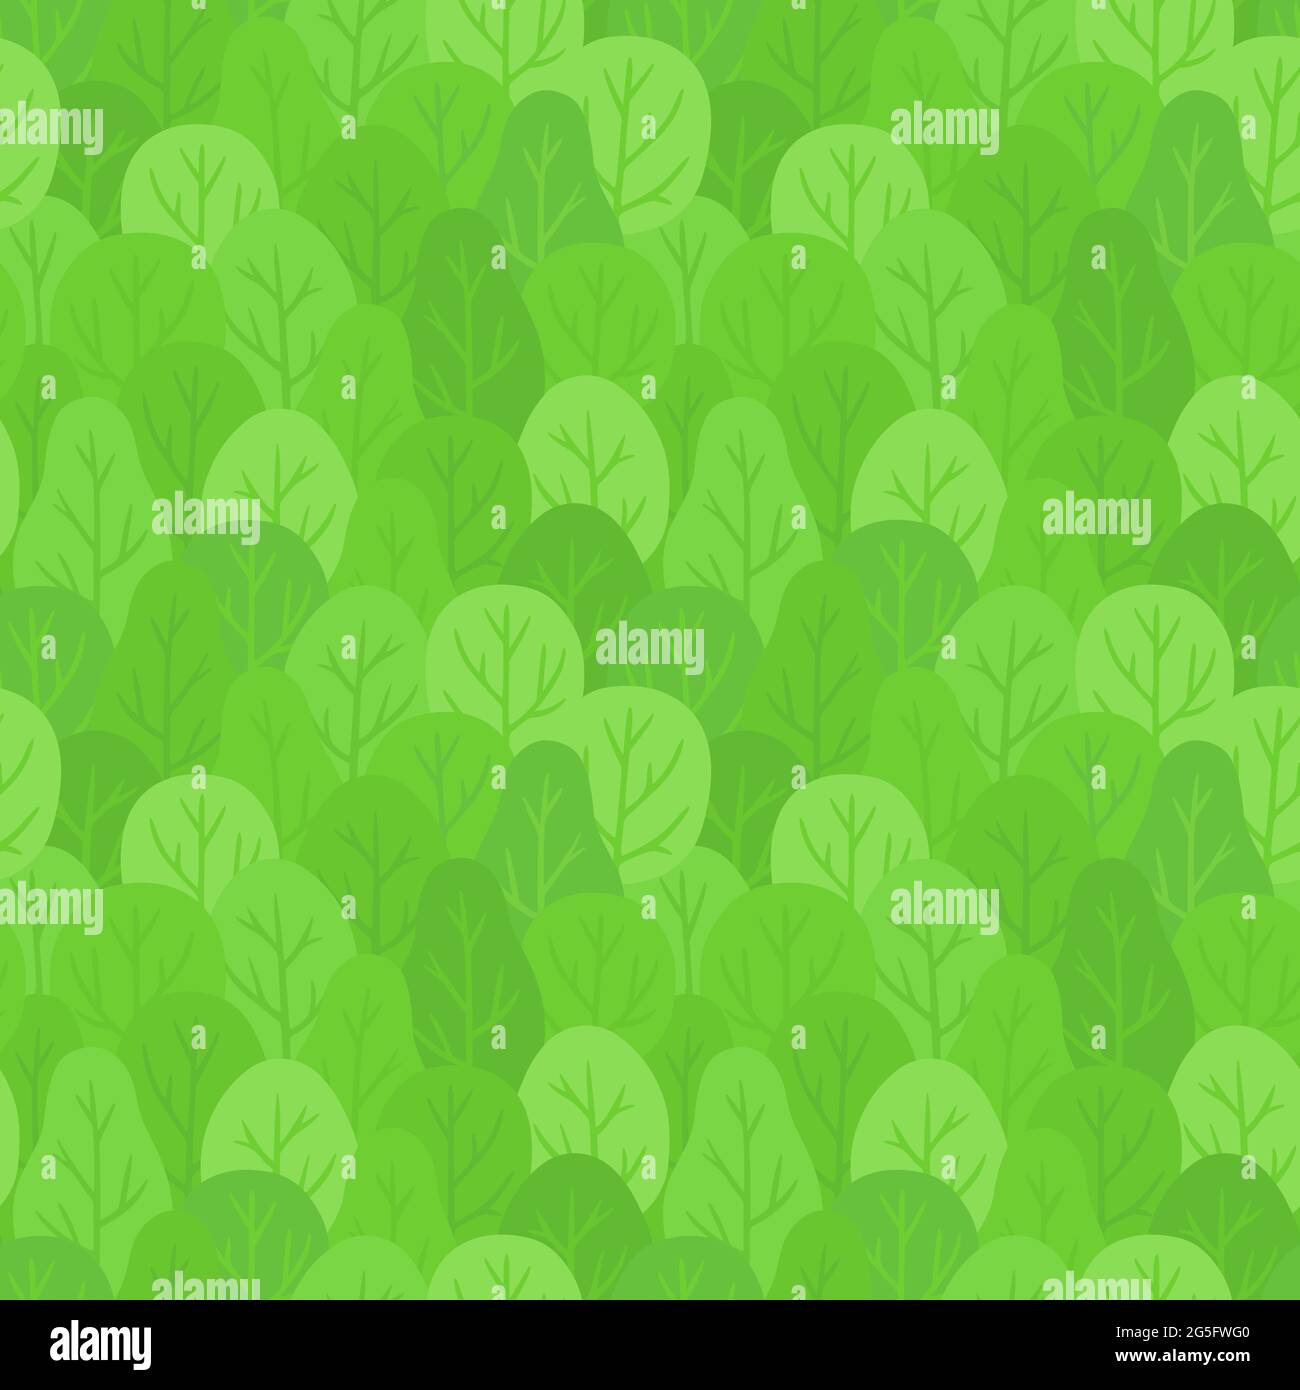 Seamless forest background. Repeating pattern of hand drawn bright green trees. Vector clip art illustration. Stock Vector